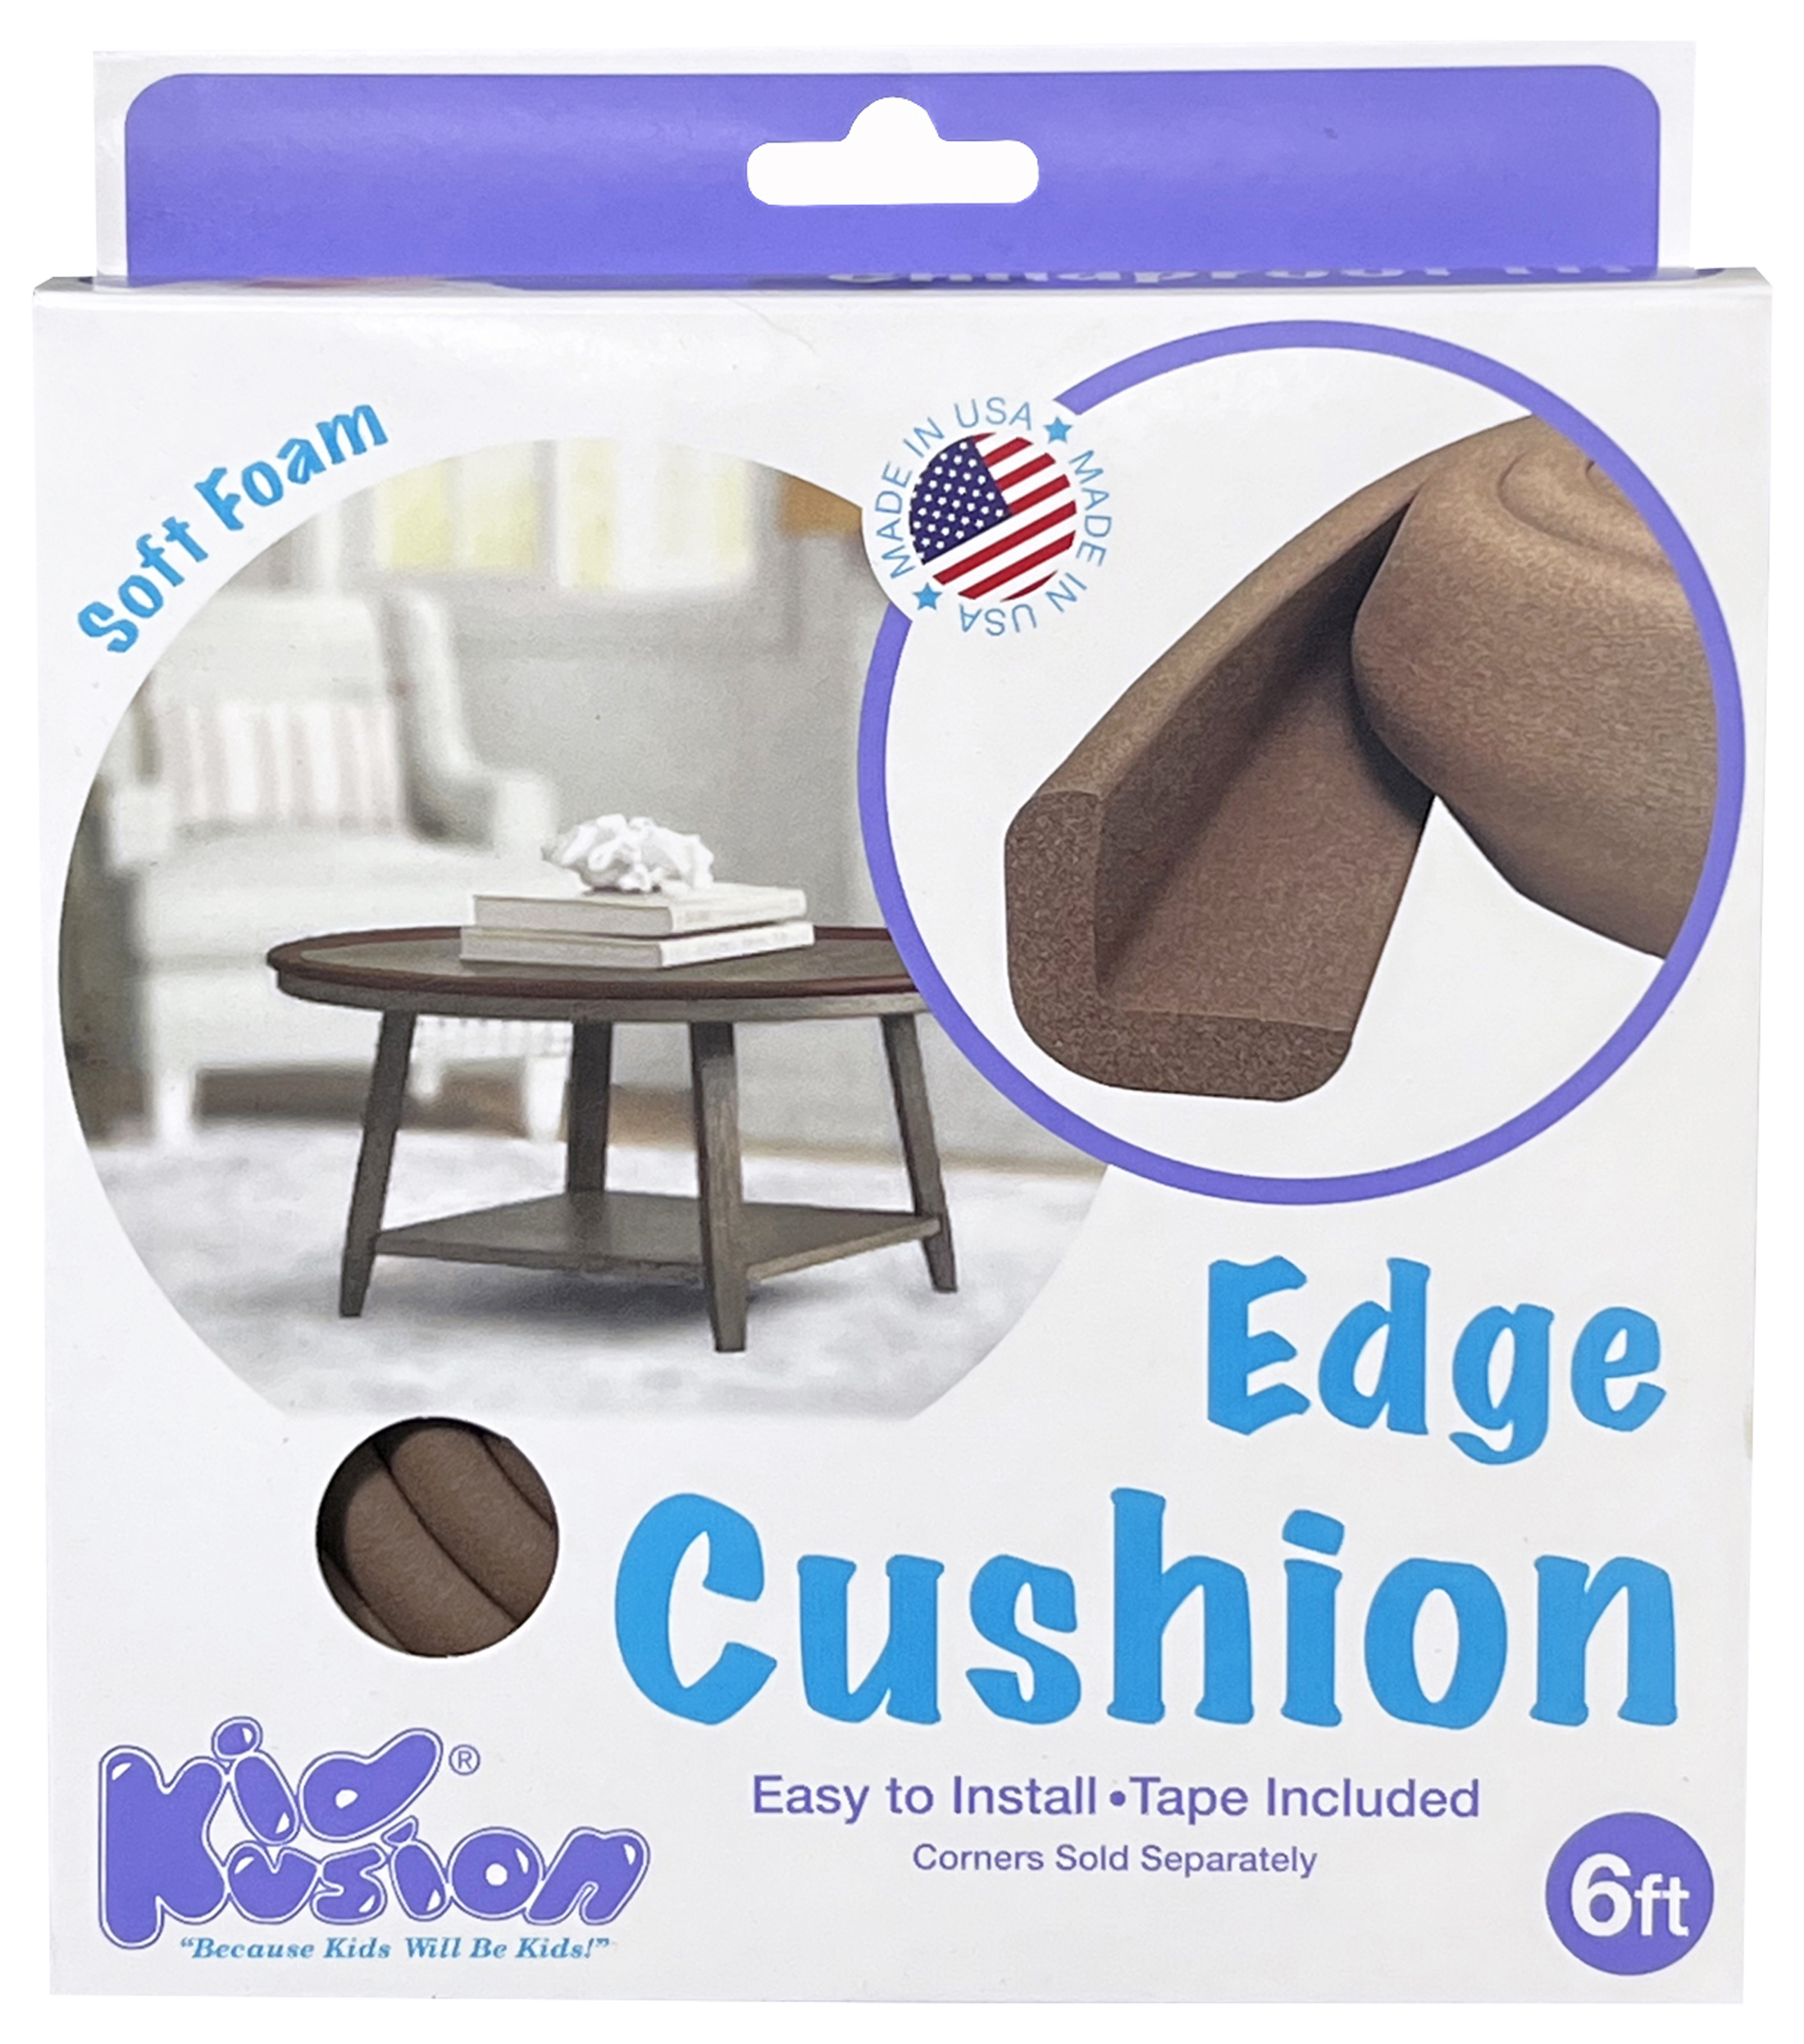 KidKusion Baby Proofing Foam Rubber Edge Cushion, Edge Protector for Tables, Furniture and more, 6 Ft, 1 CT - image 3 of 6